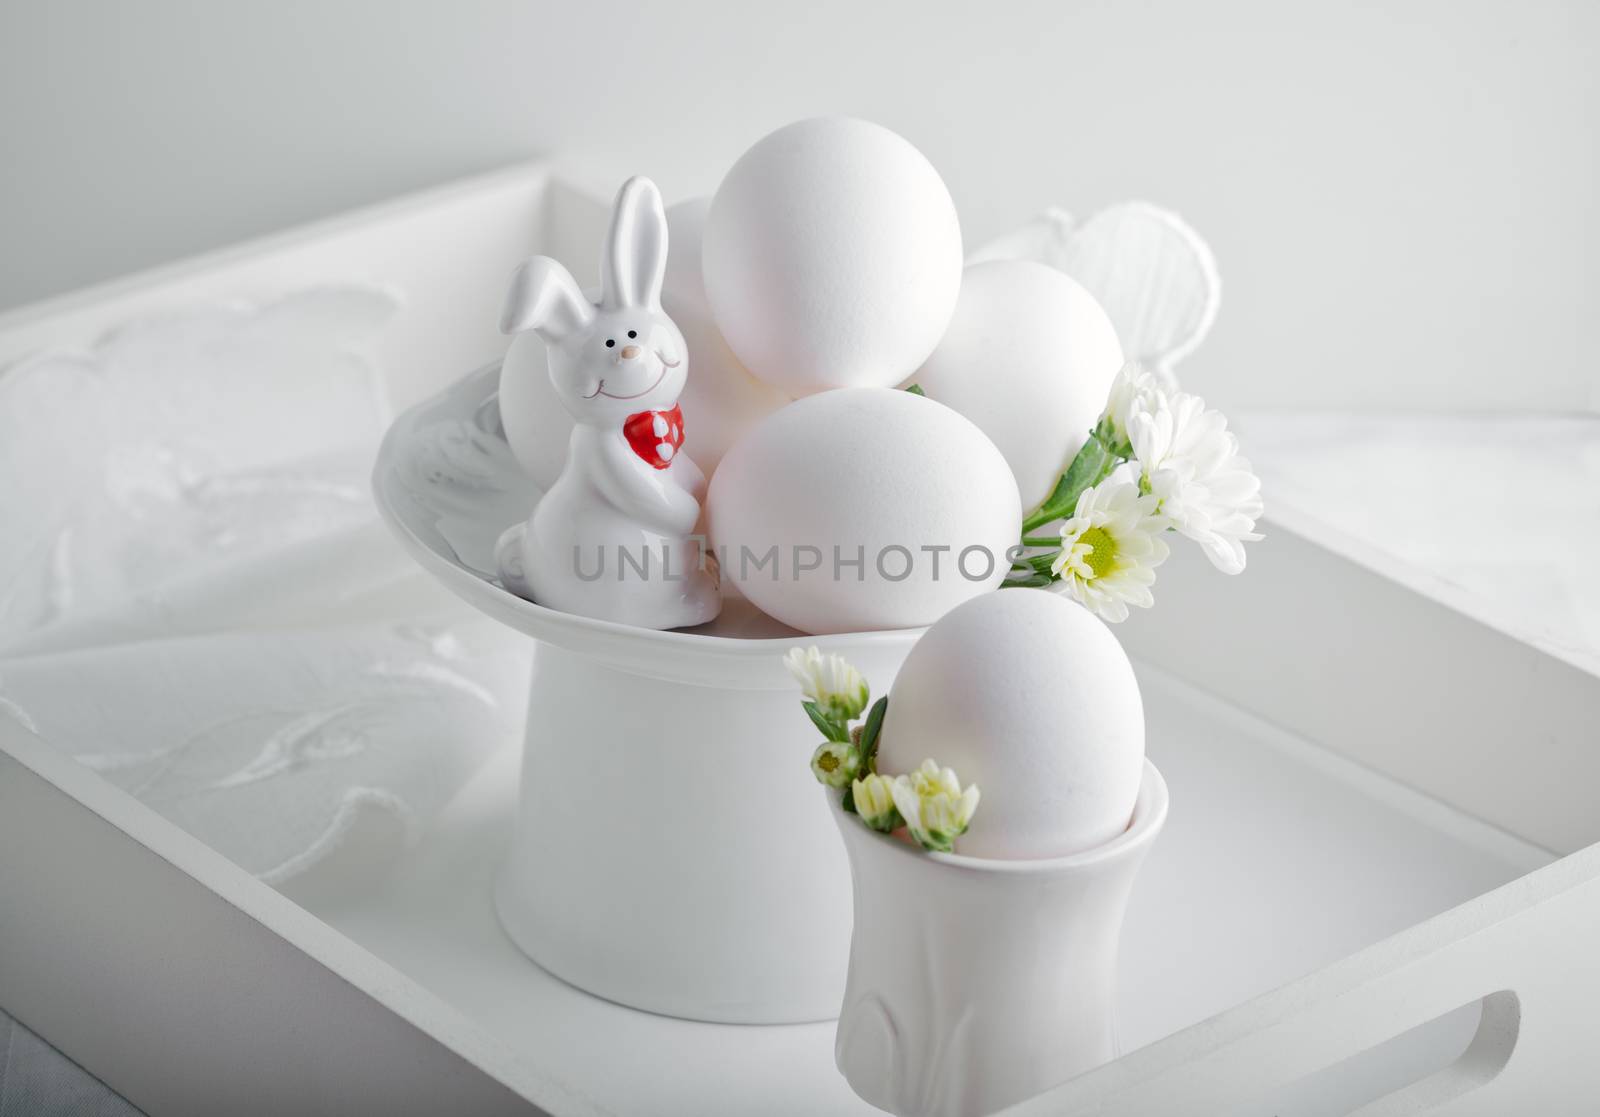 Eggs, rabbit and flower by supercat67